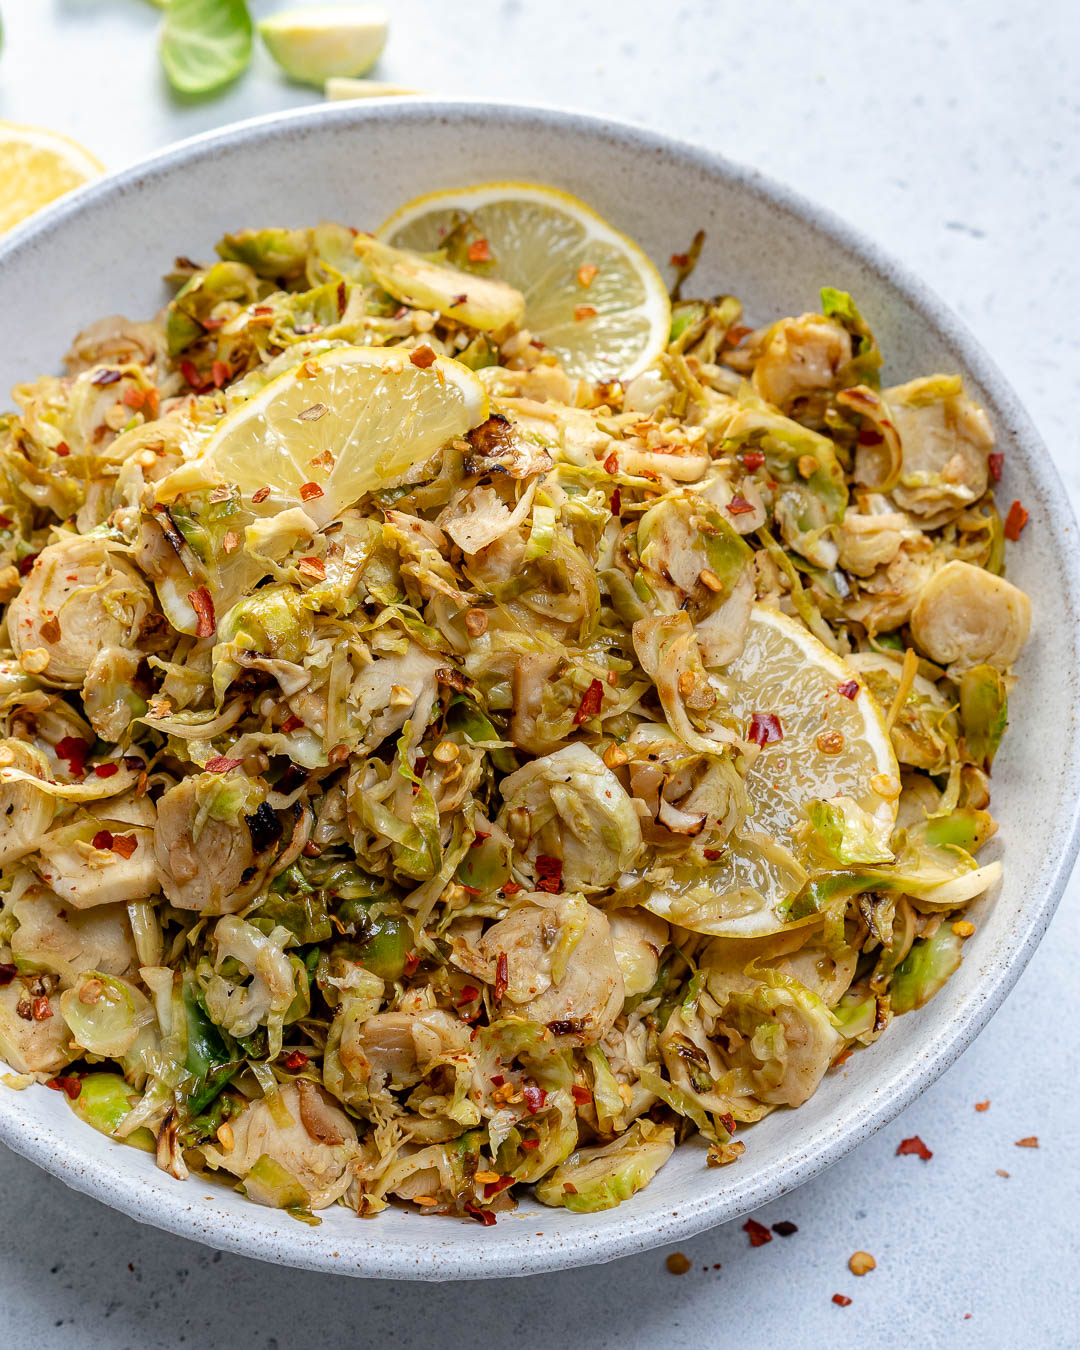 Eat Clean Lemony Shredded Brussels Sprouts